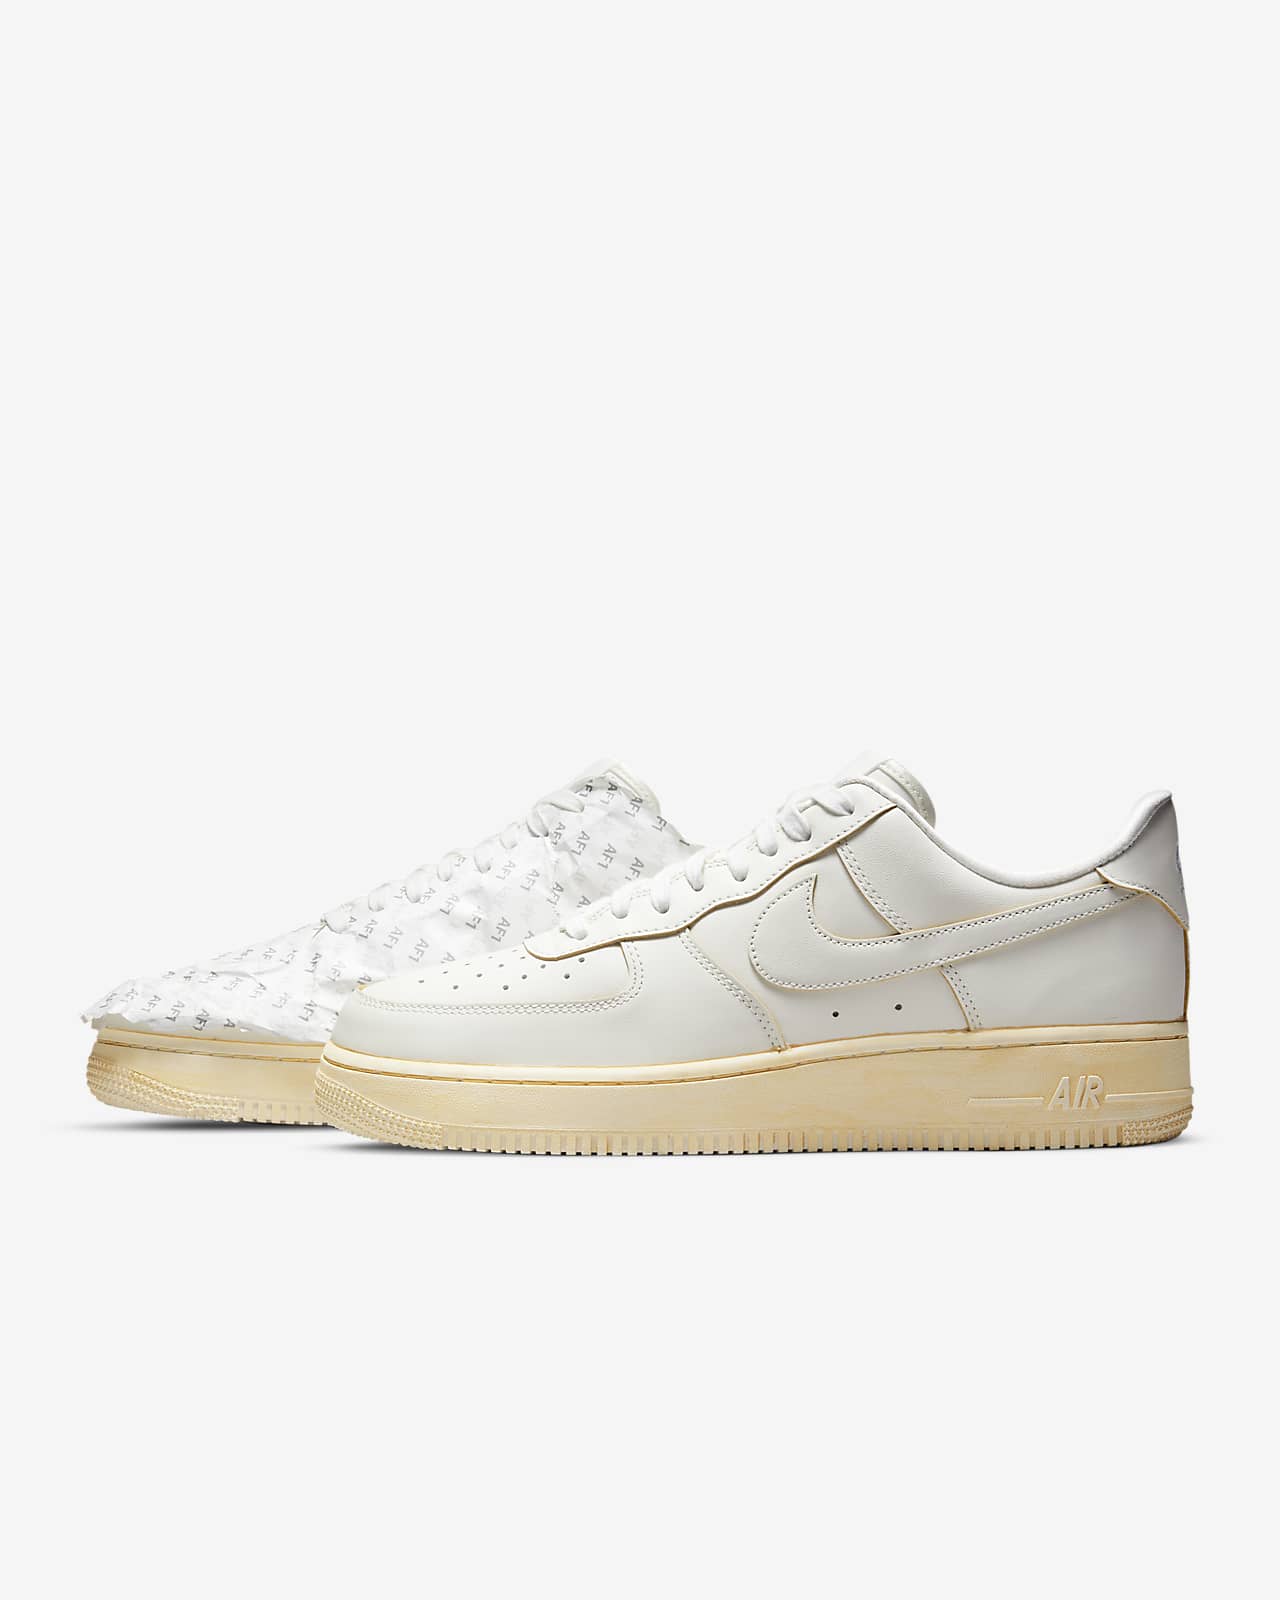 SoleWhat - Nike Air Force 1 '07 Lv8. This pair features a split